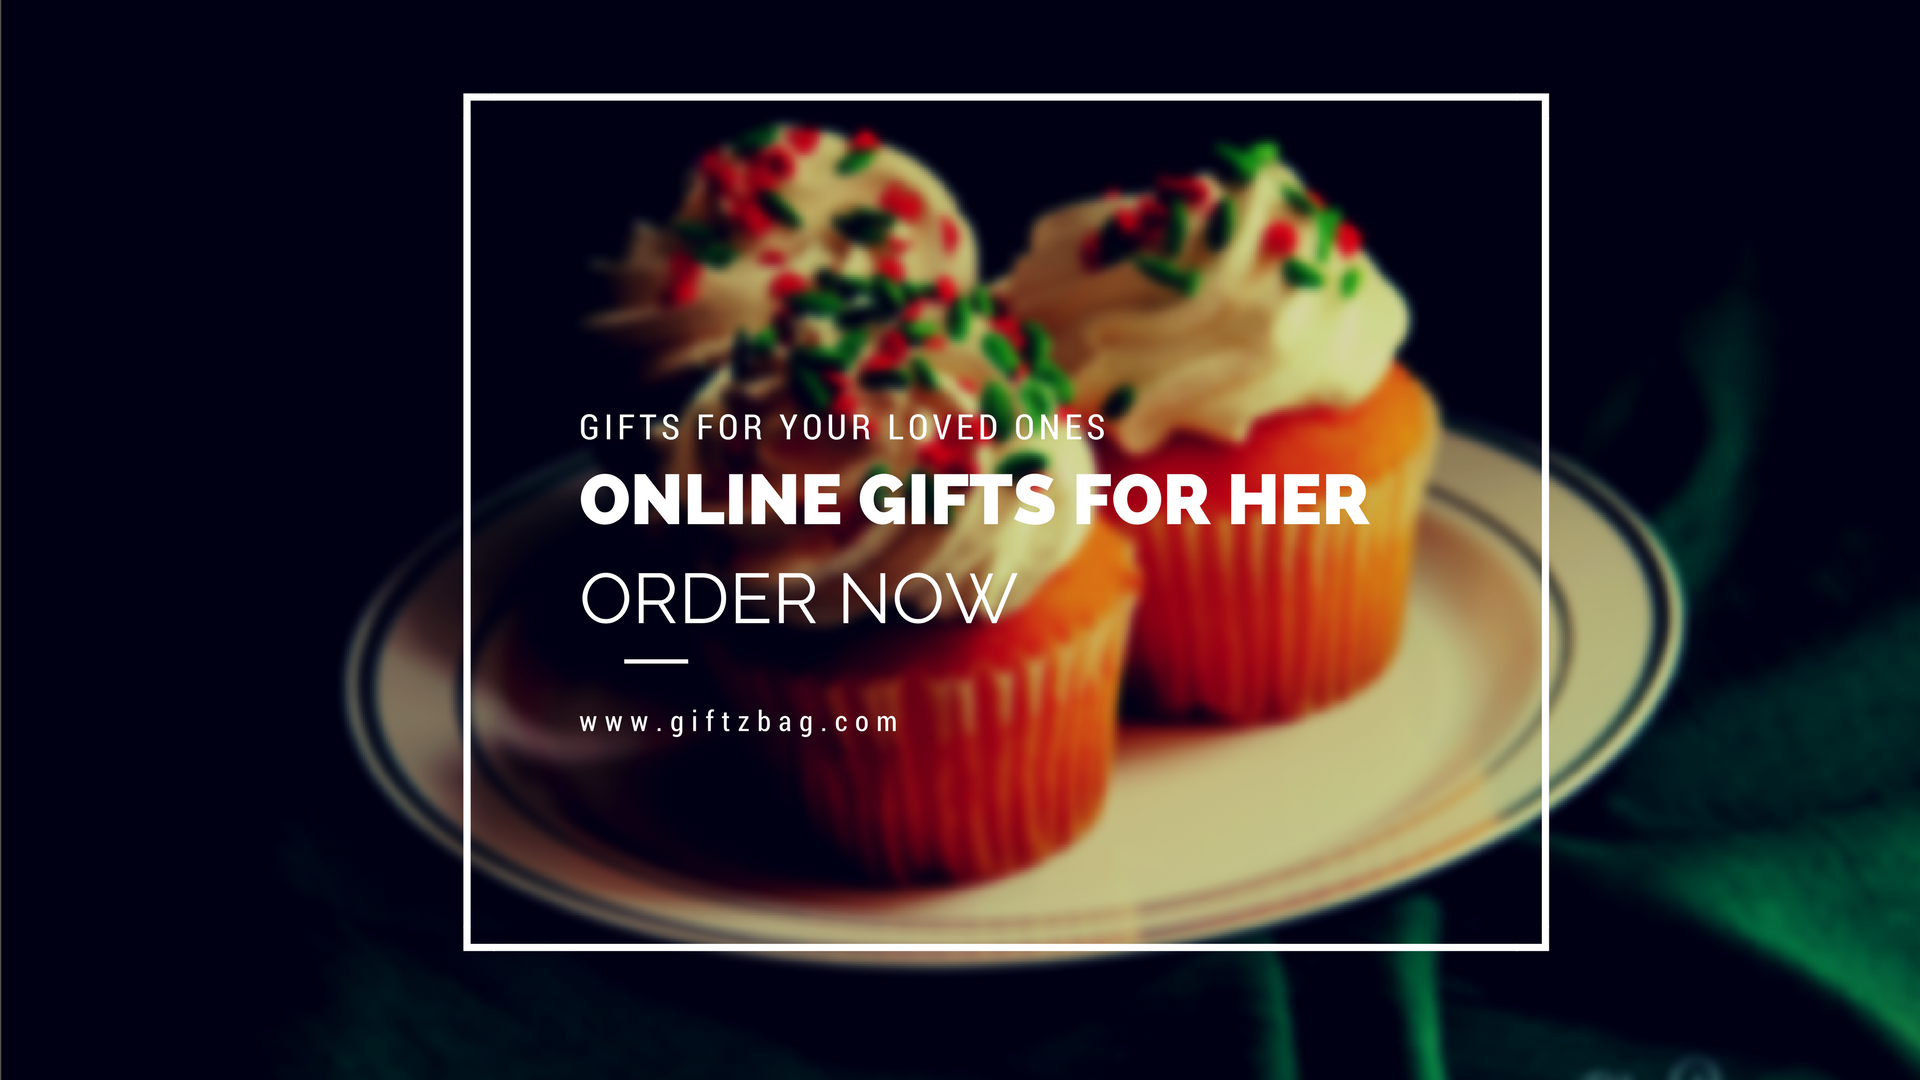 Gifts for your loved ones – choose based on your criteria